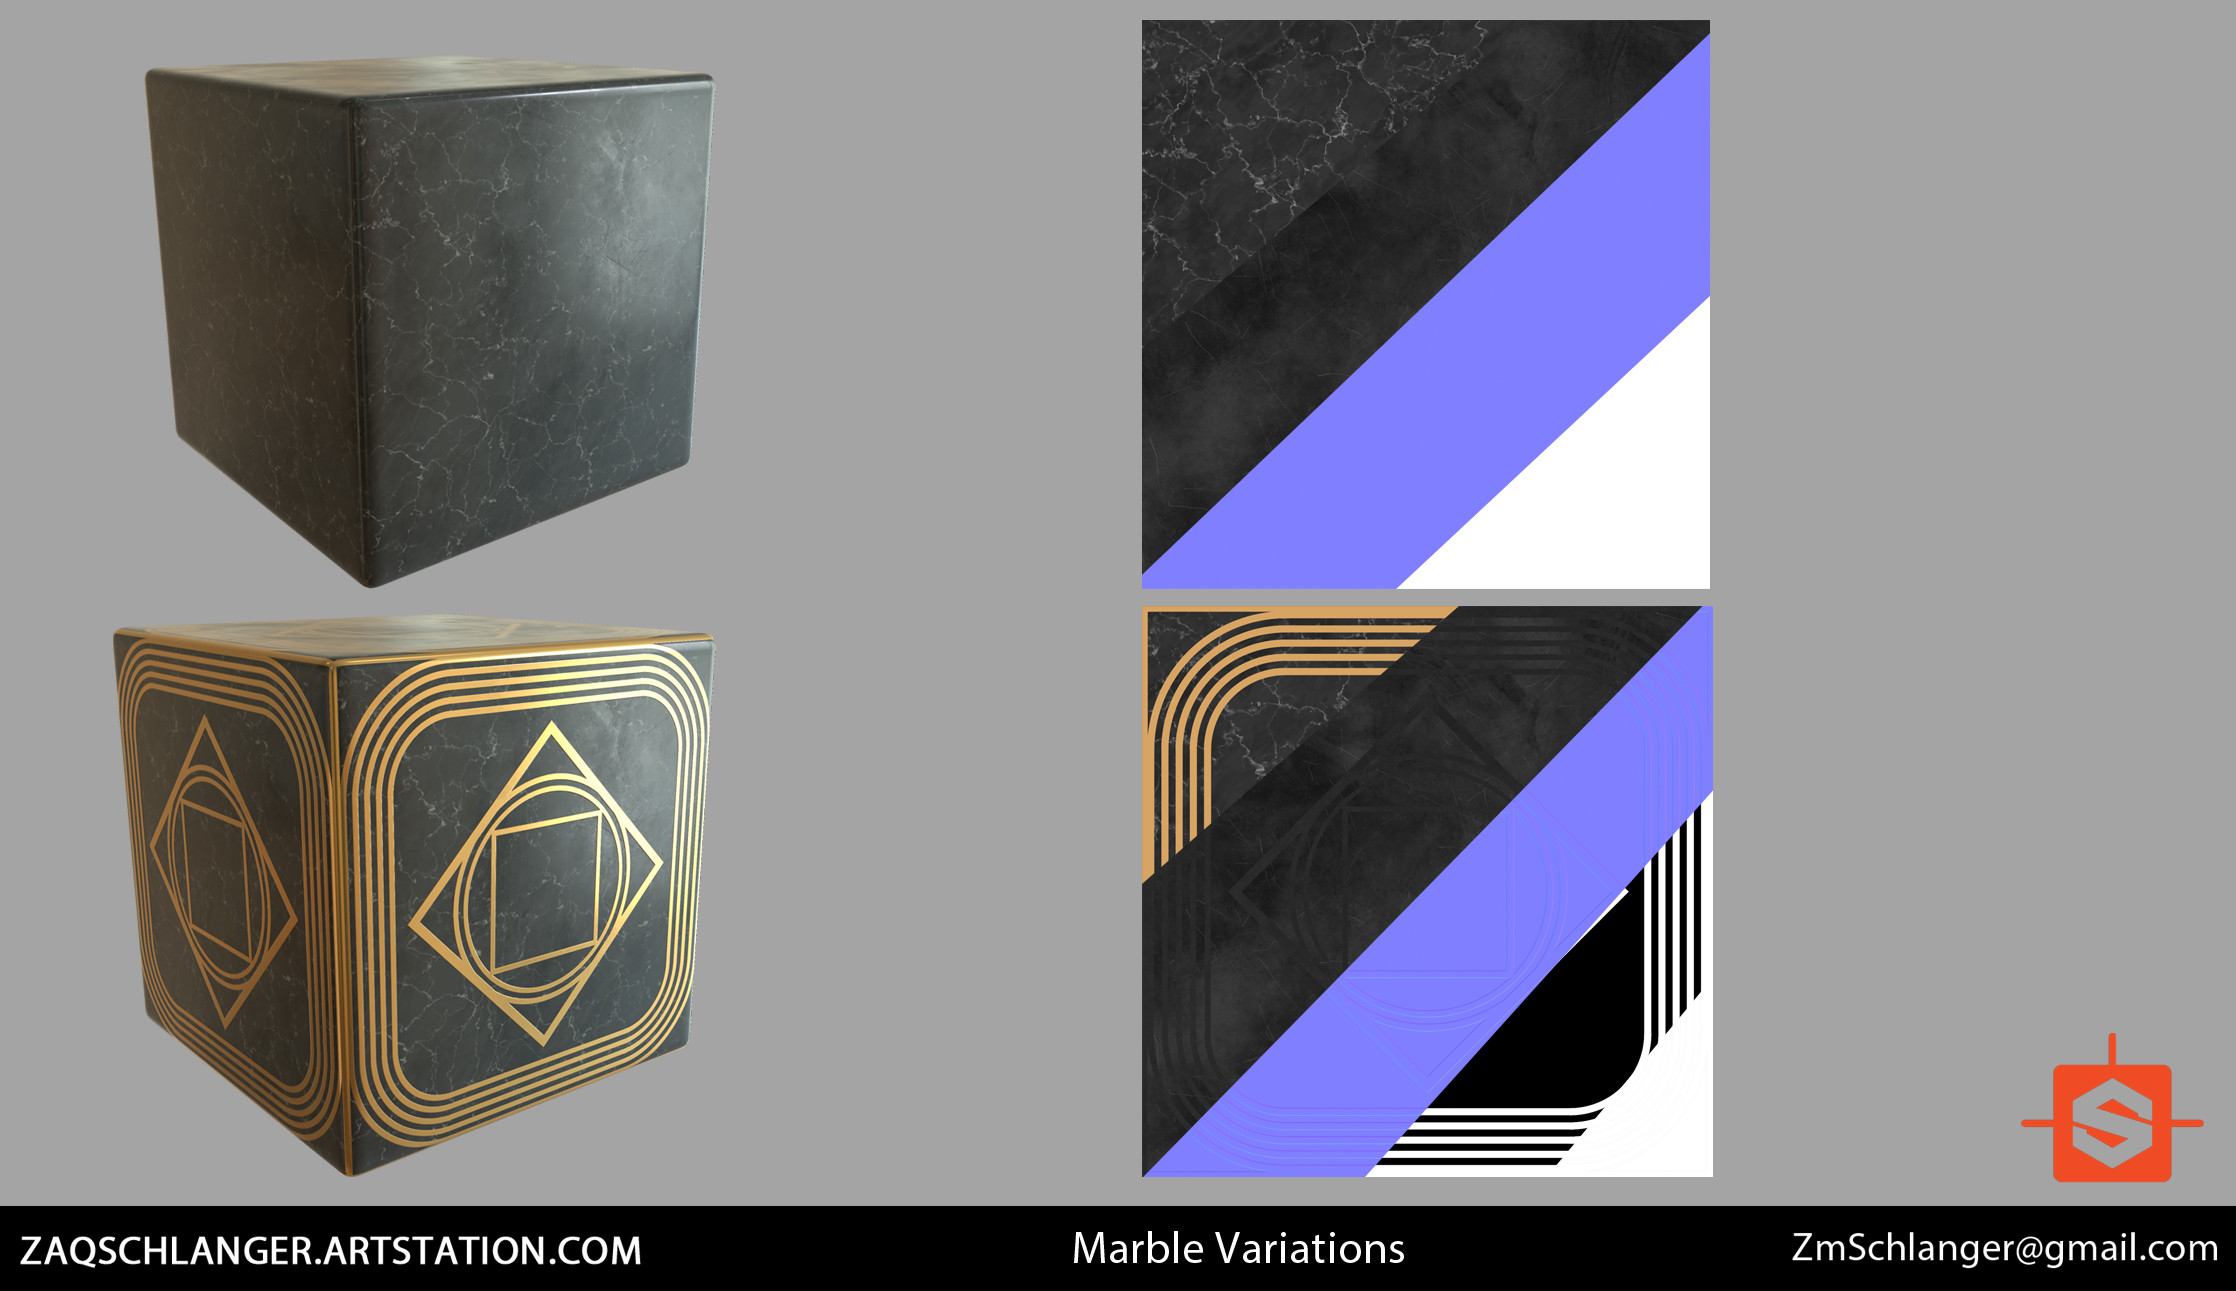 Both procedural marble materials made in Substance Designer 